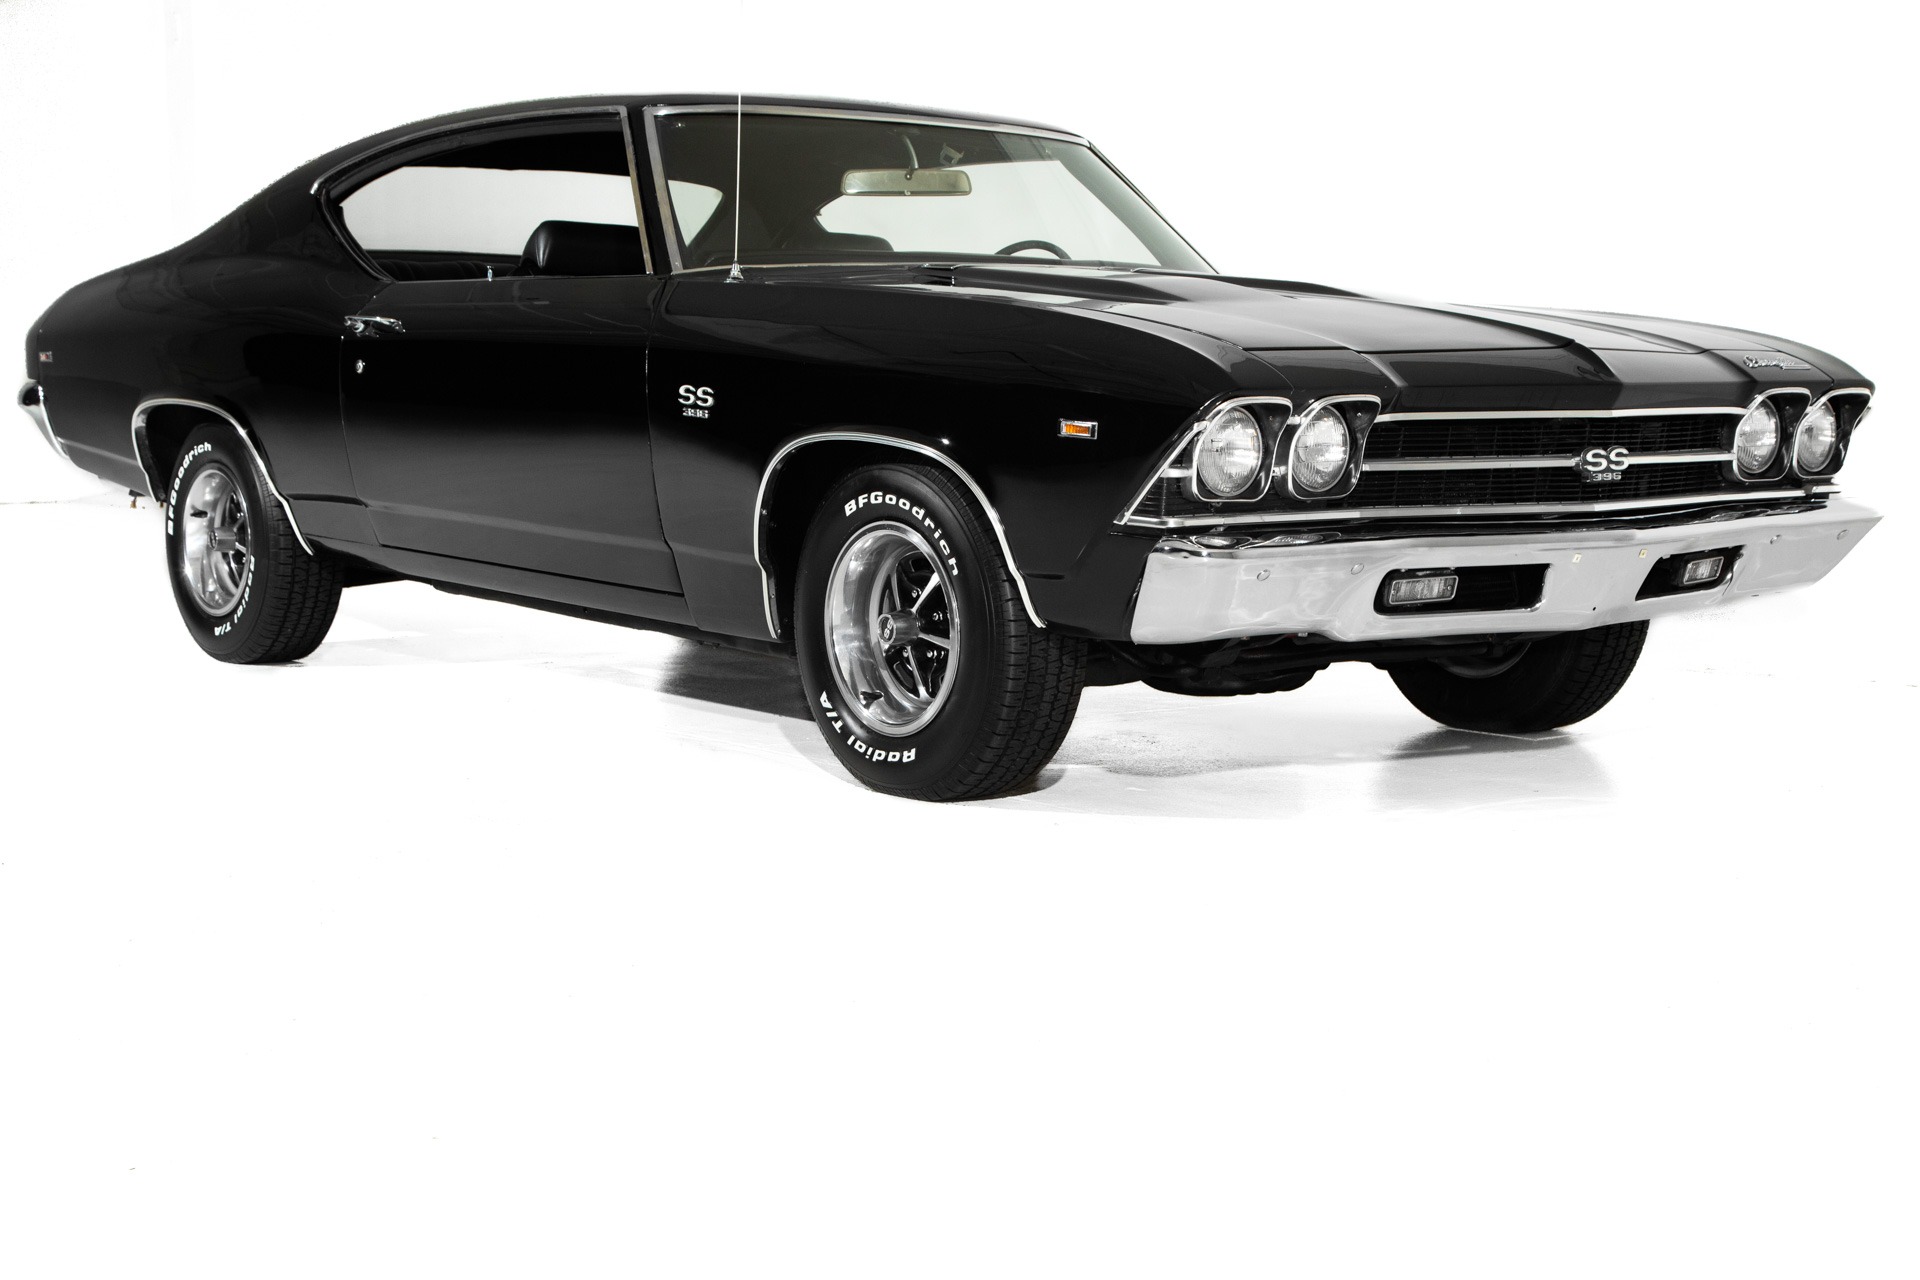 For Sale Used 1969 Chevrolet Chevelle Black Real SS 396 4-Spd | American Dream Machines Des Moines IA 50309